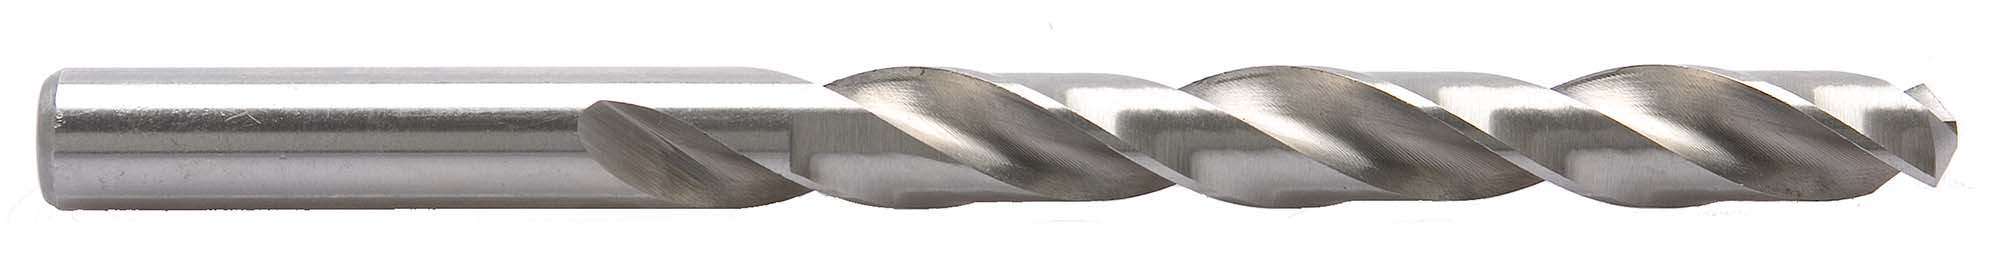 A (.234") Production Quality Bright Finish Jobber Drill Bit, High Speed Steel